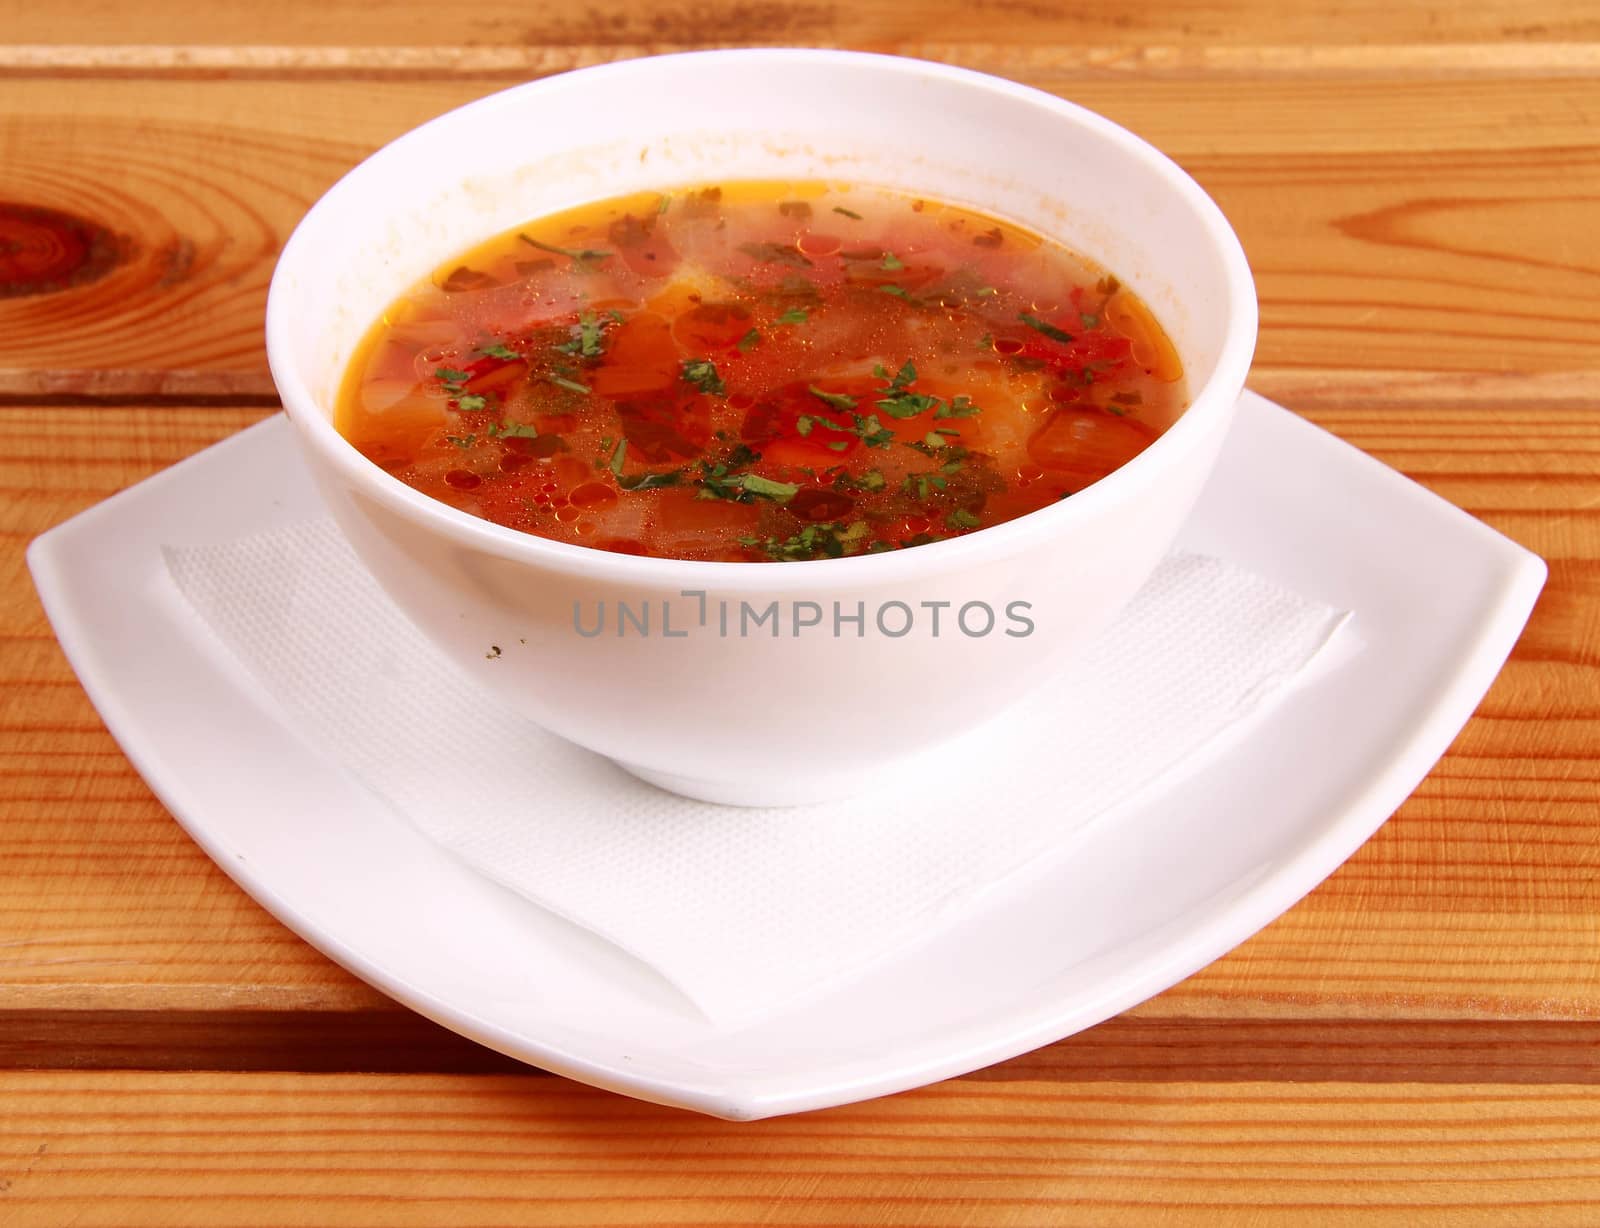 Bowl of Bright Red Creamy Tomato Soup with Yogurt by shutswis